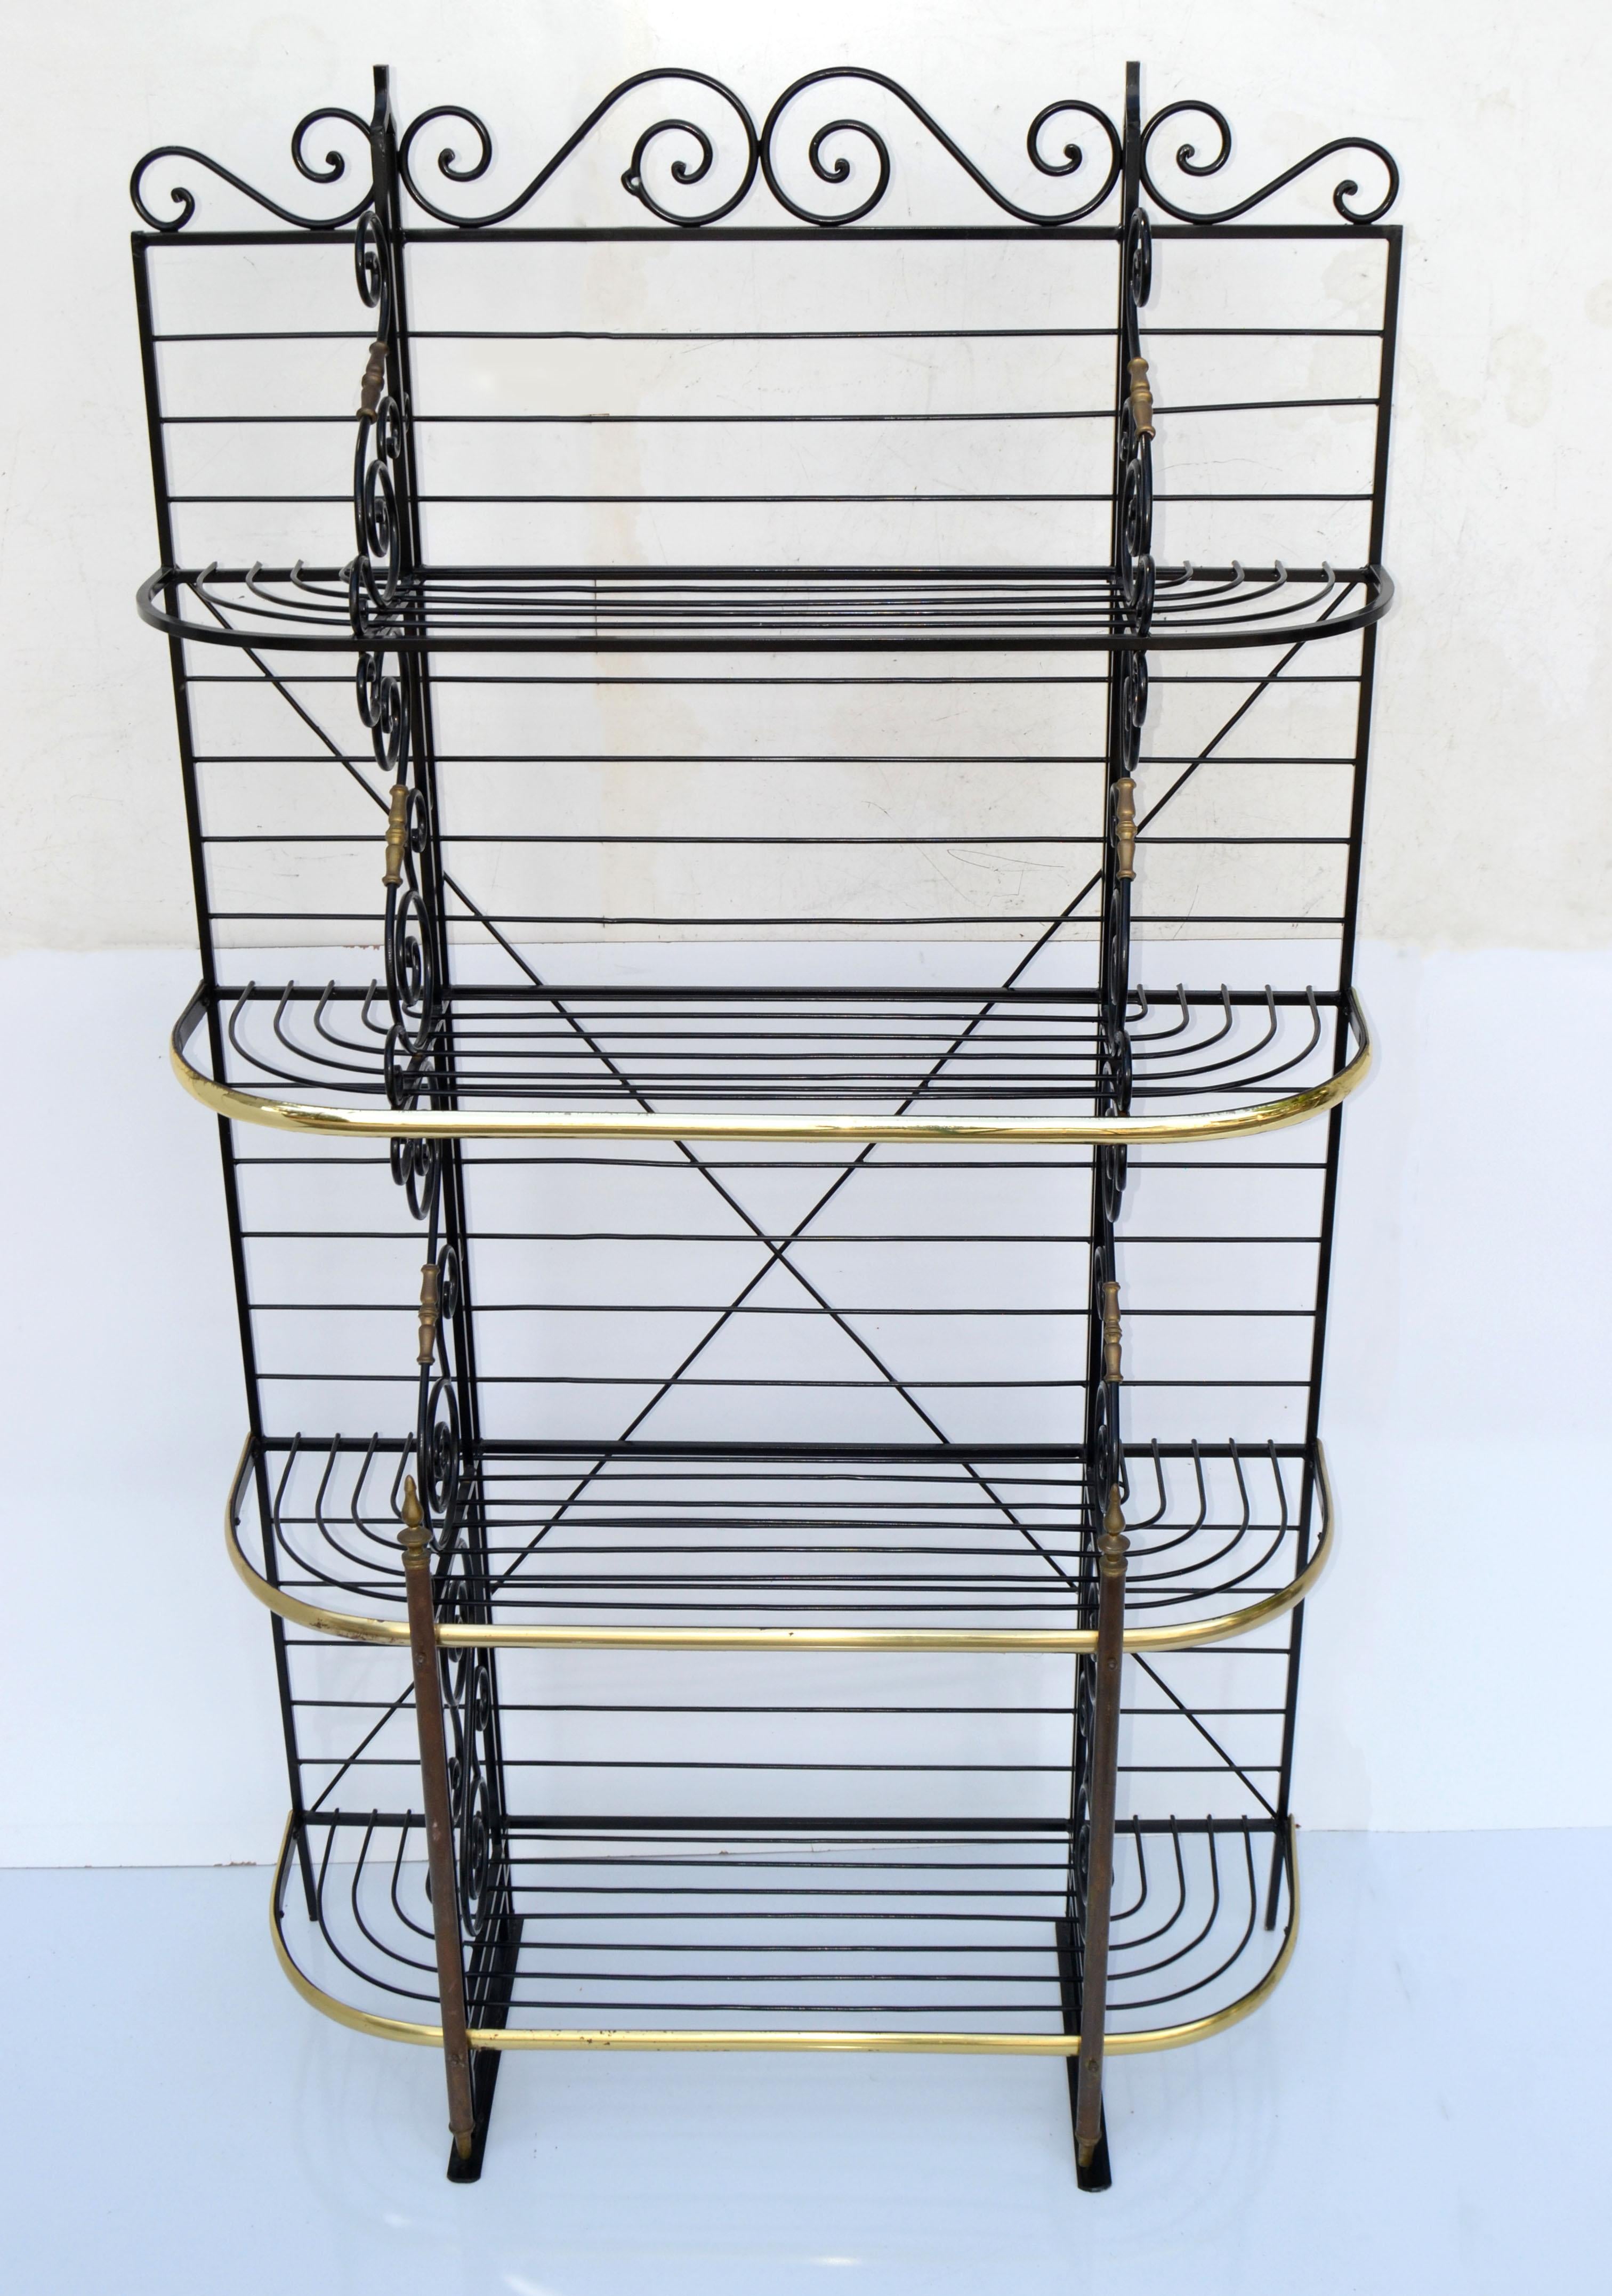 French Wrought Iron & Brass 4 Tier Bakery Shelf in Black & Gold Finish Etagere For Sale 5